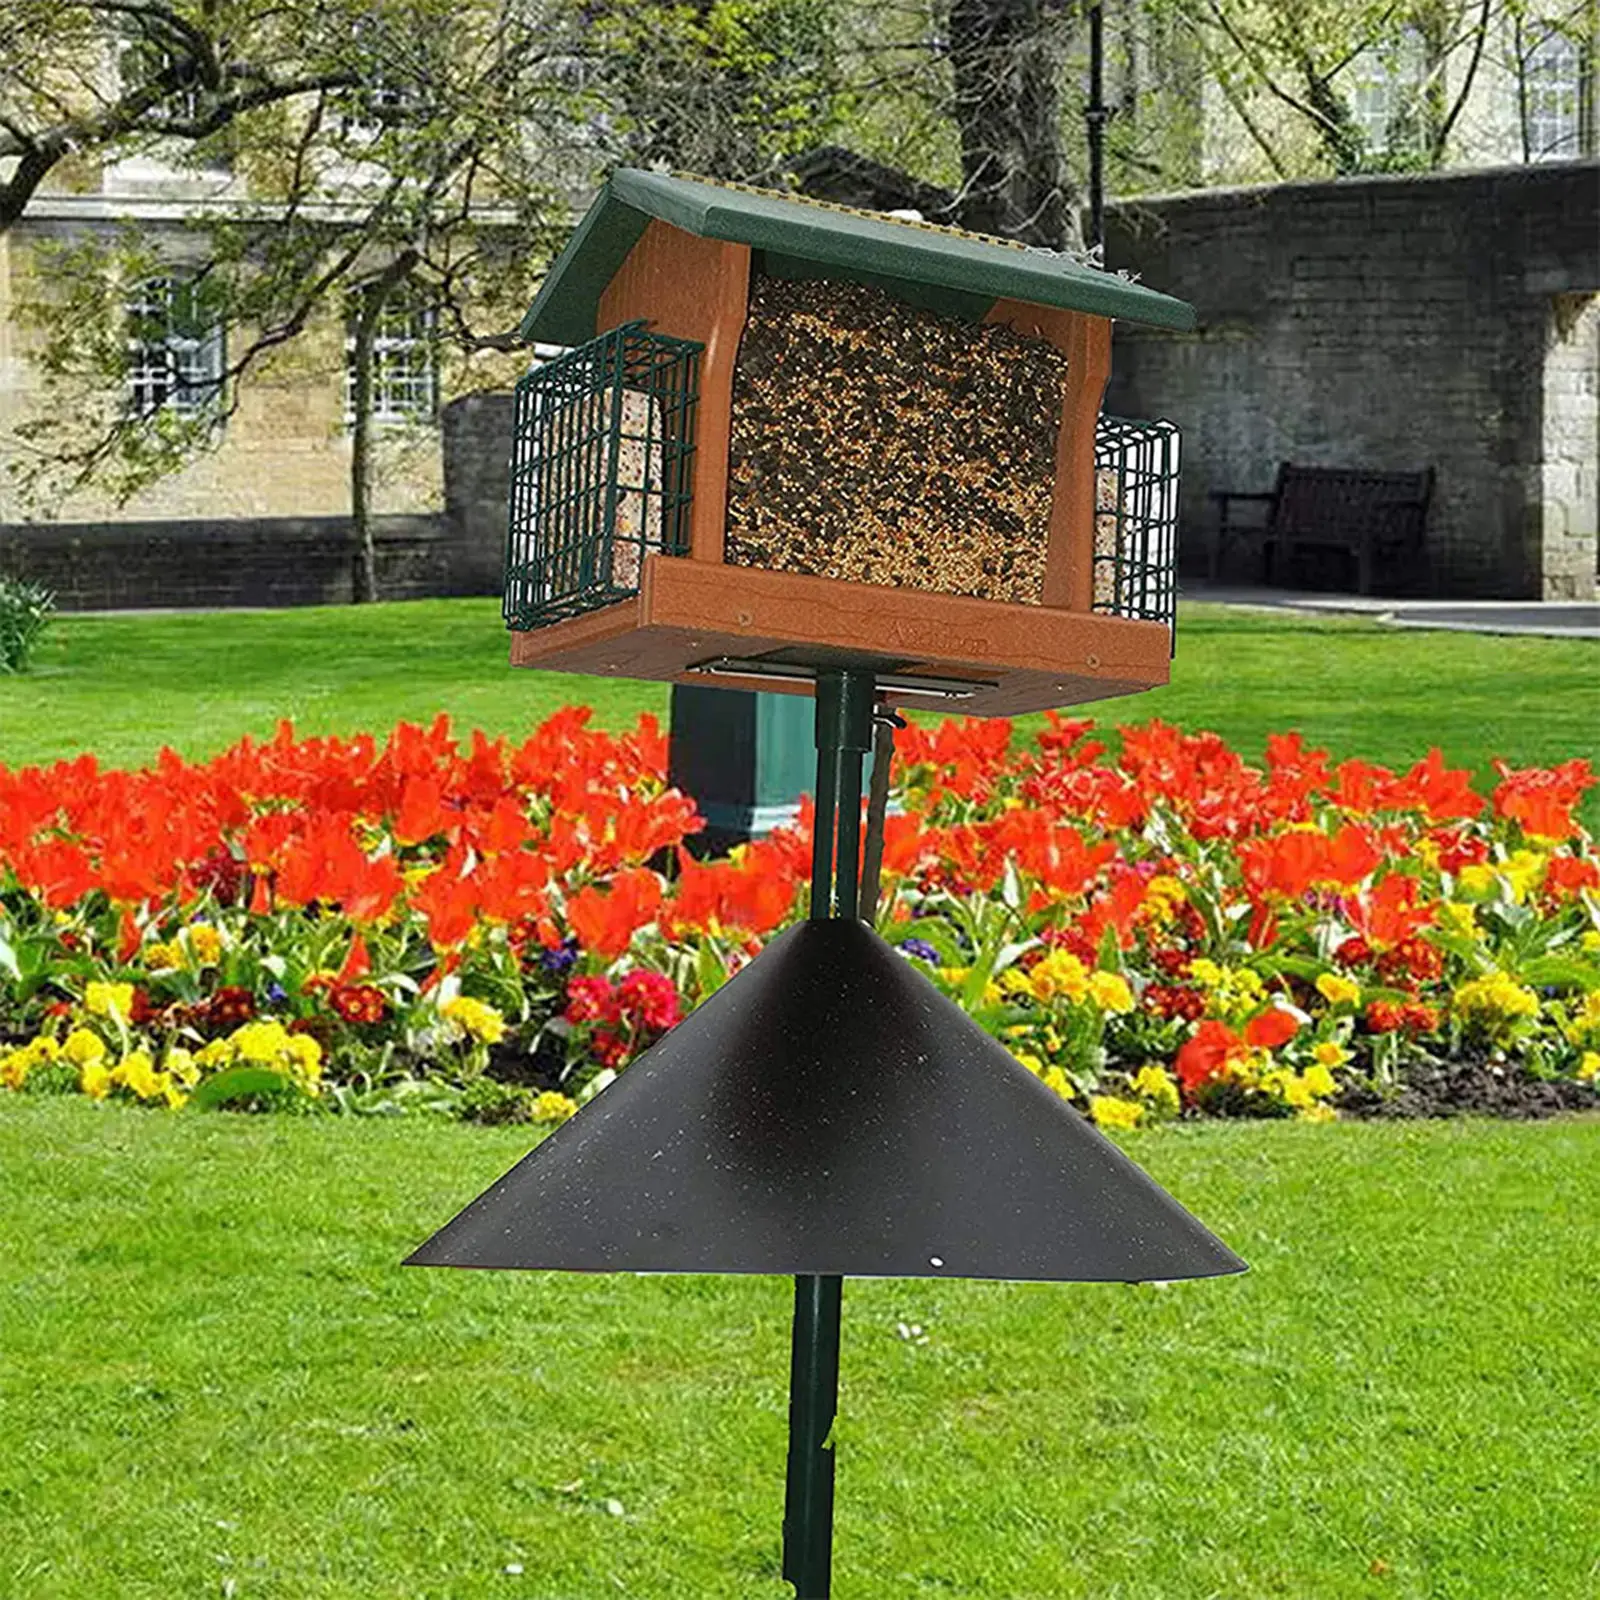 18inch Foldable  Wrap Around Squirrel Baffle Guard Rodent Protect Bird Feeder for Pole Mounted And Hanging Bird Feeders.